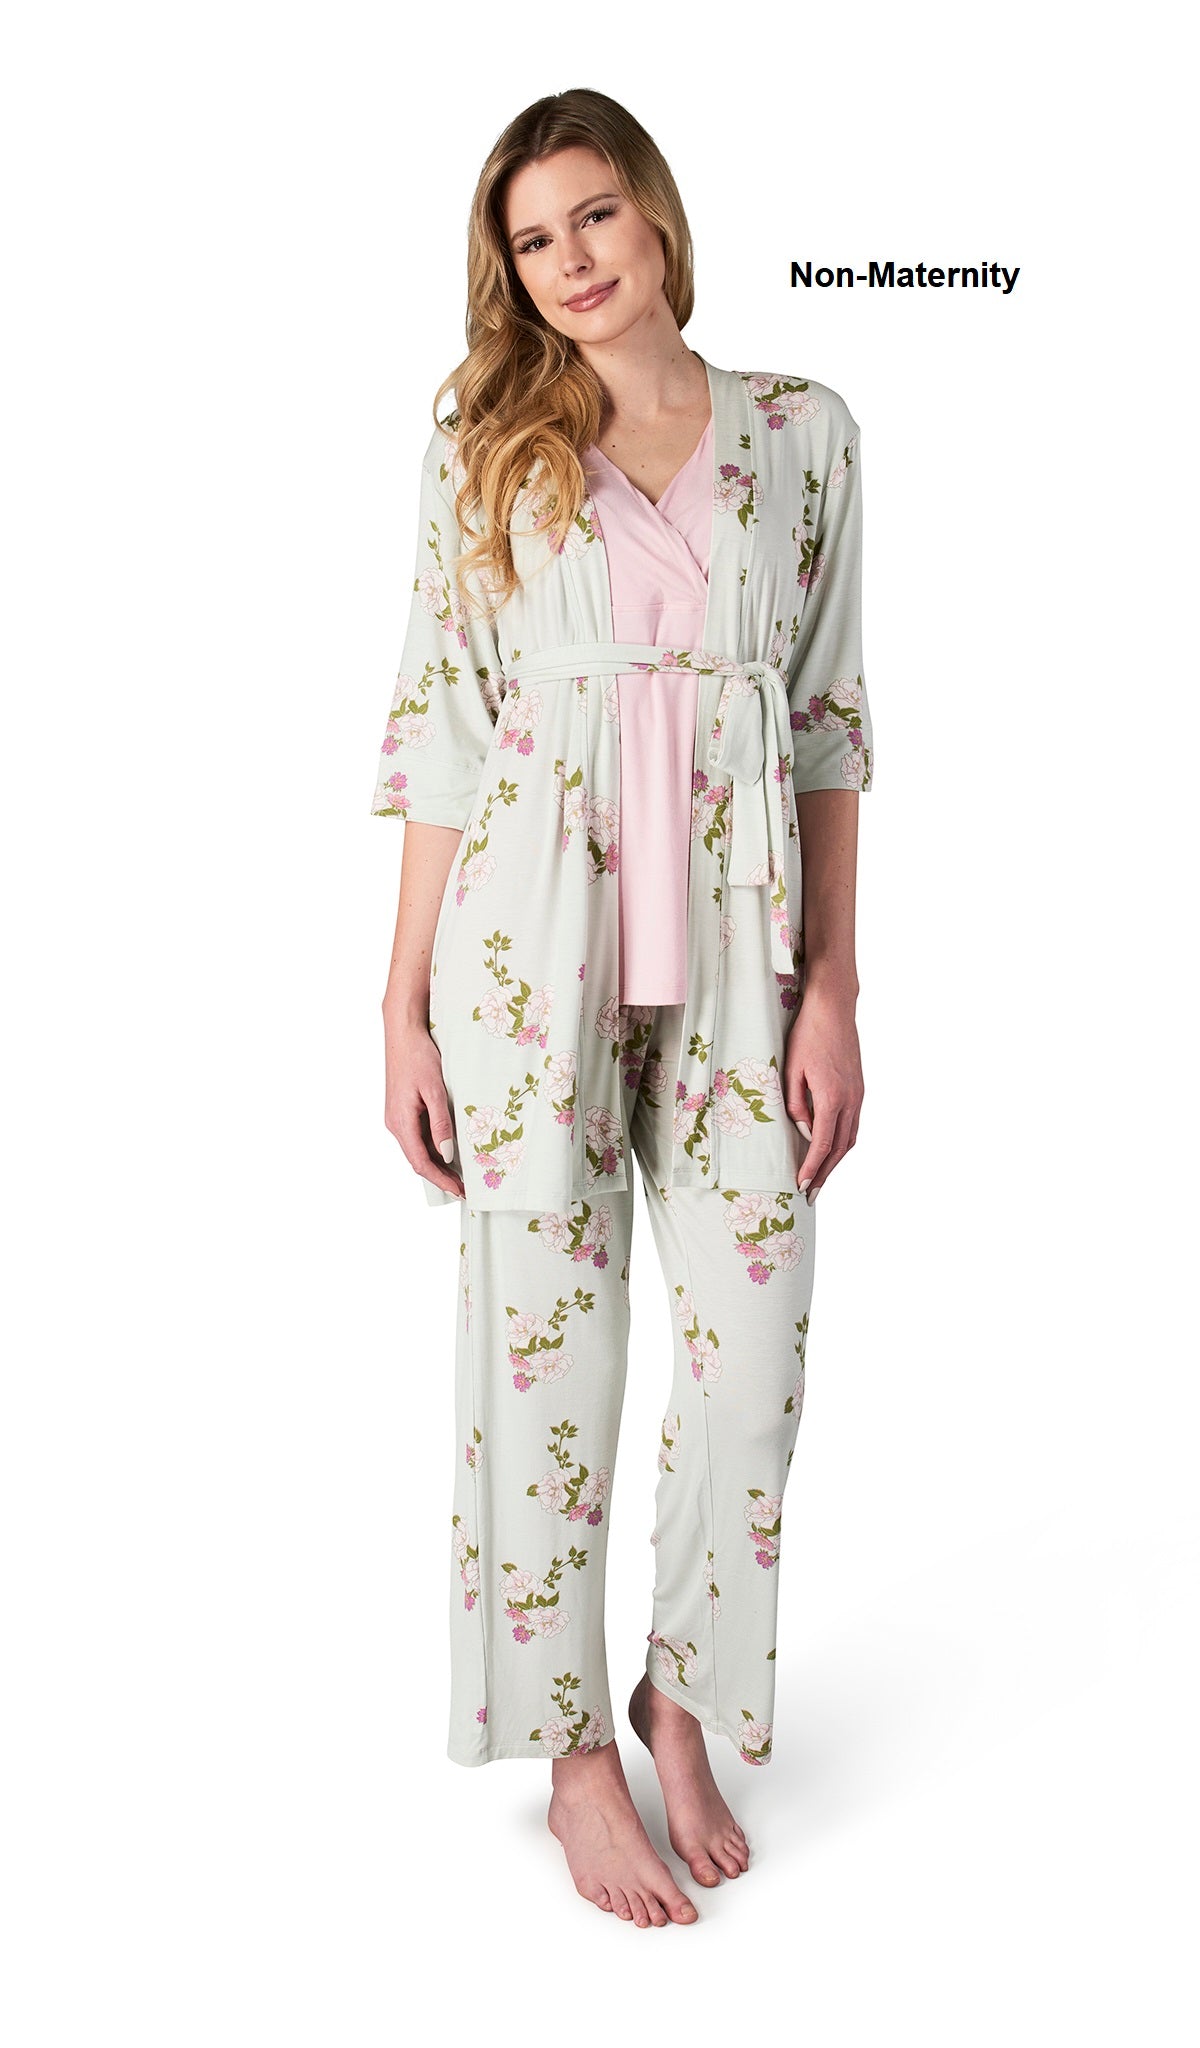 Peony Analise 3-Piece Set. Woman wearing 3/4 sleeve robe, tank top and pant as non-maternity.